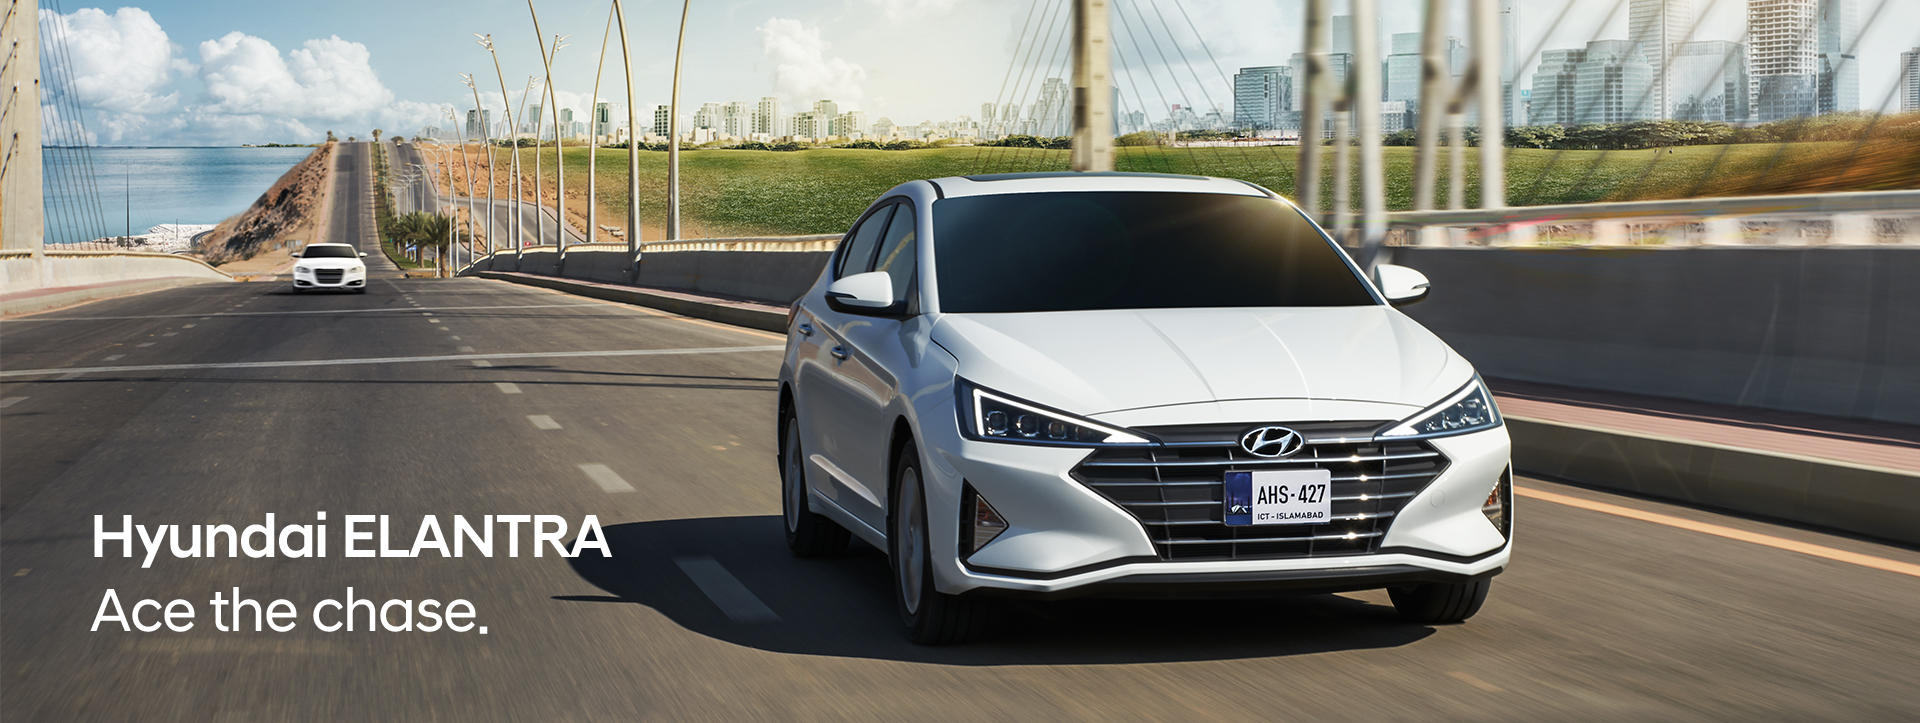 The All New Elantra Now in Pakistan